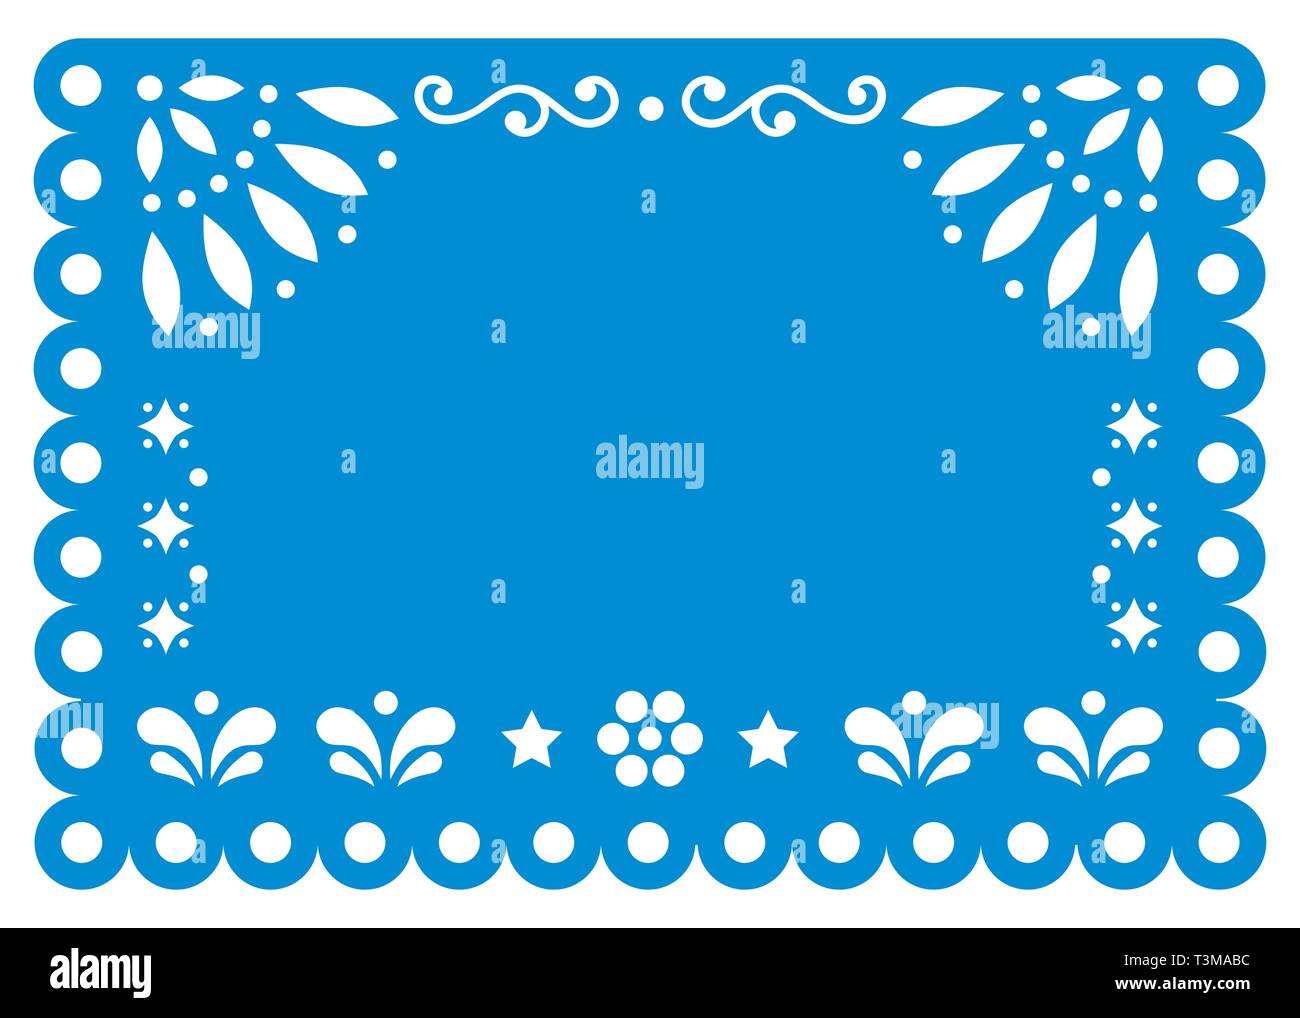 Papel Picado vector template design in blue with no text, Mexican paper decoration with flowers and geometric shapes - greeting card or invitation Stock Vector